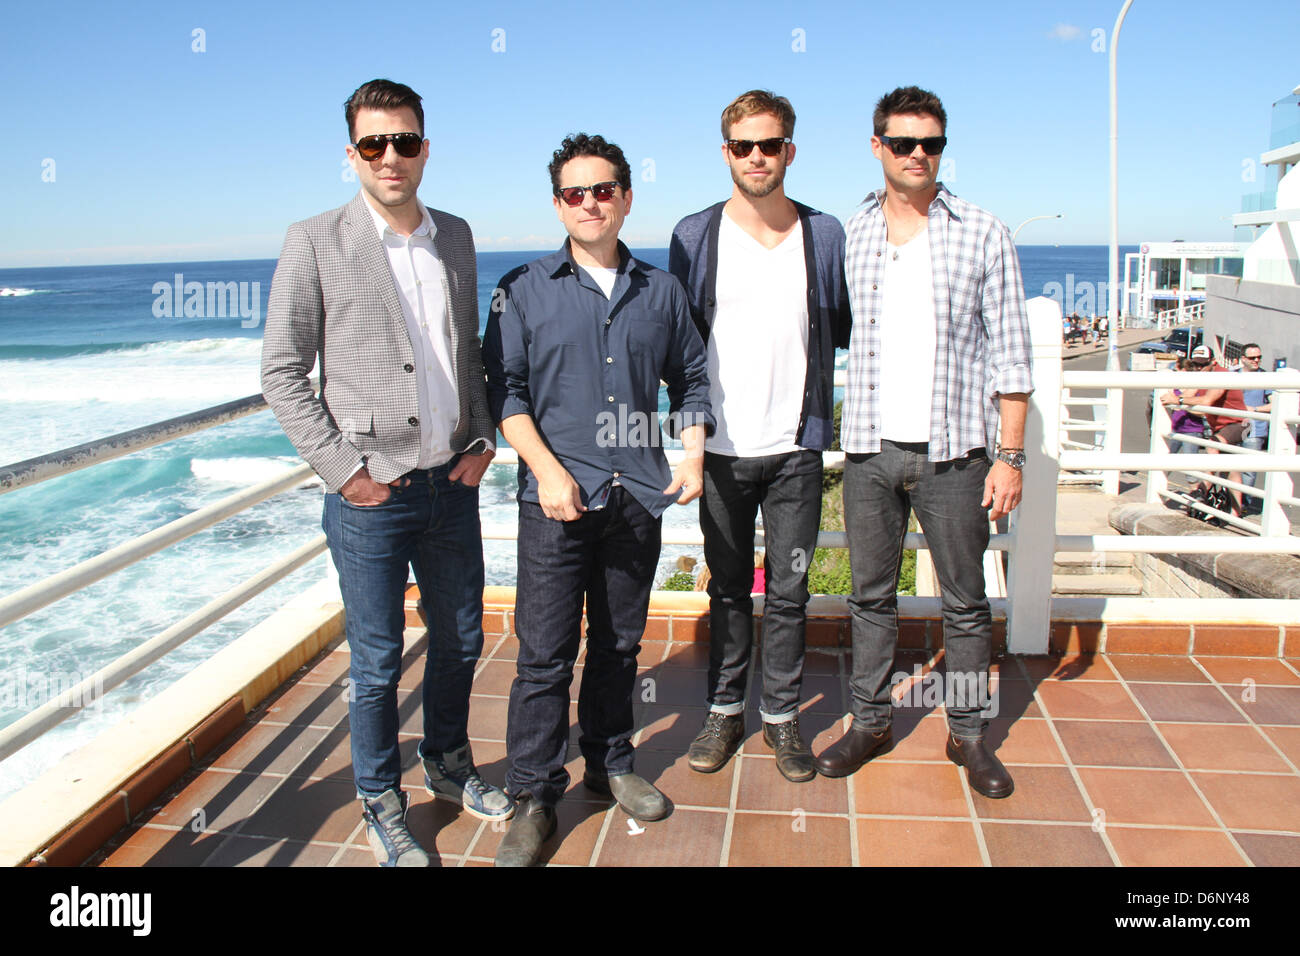 Bondi Beach, Sydney, NSW, Australia. 22 April 2013. Director J.J. Abrams and actors Chris Pine, Zachary Quinto and Karl Urban pictured at Bondi Beach for a photocall ahead of the Star Trek Into Darkness red carpet Australian and World Premiere. Lifeguard Deano from Bondi Rescue joined them. Credit: Credit:  Richard Milnes / Alamy Live News. Stock Photo